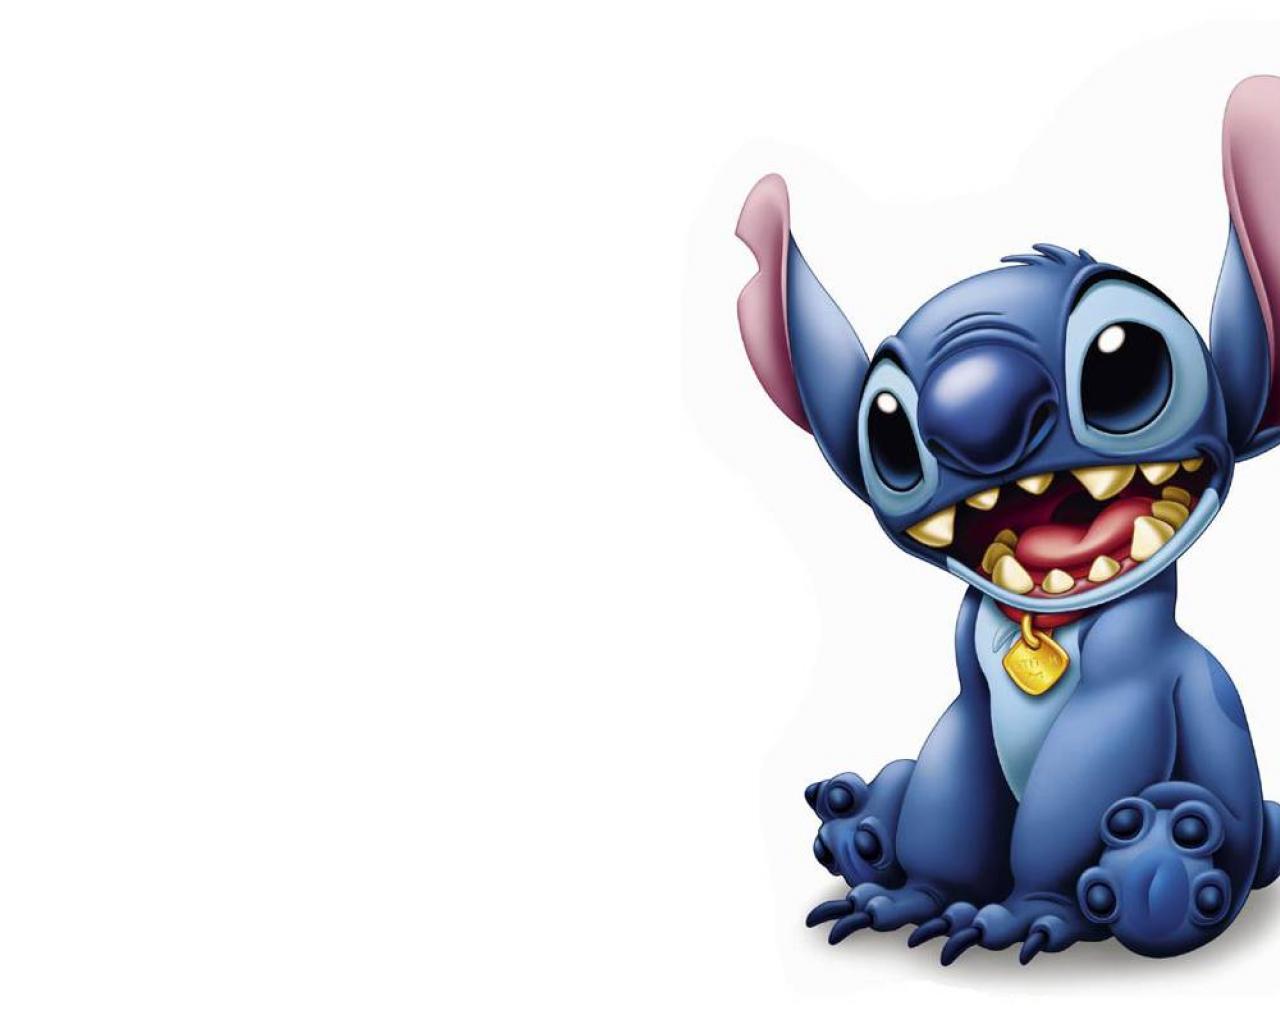 Free download 1280x1024 stitch lilo and stitch wallpaperjpg [1280x1024] for your Desktop, Mobile & Tablet. Explore Cute Lilo and Stitch Wallpaper. Cute Lilo and Stitch Wallpaper, Disney Lilo and